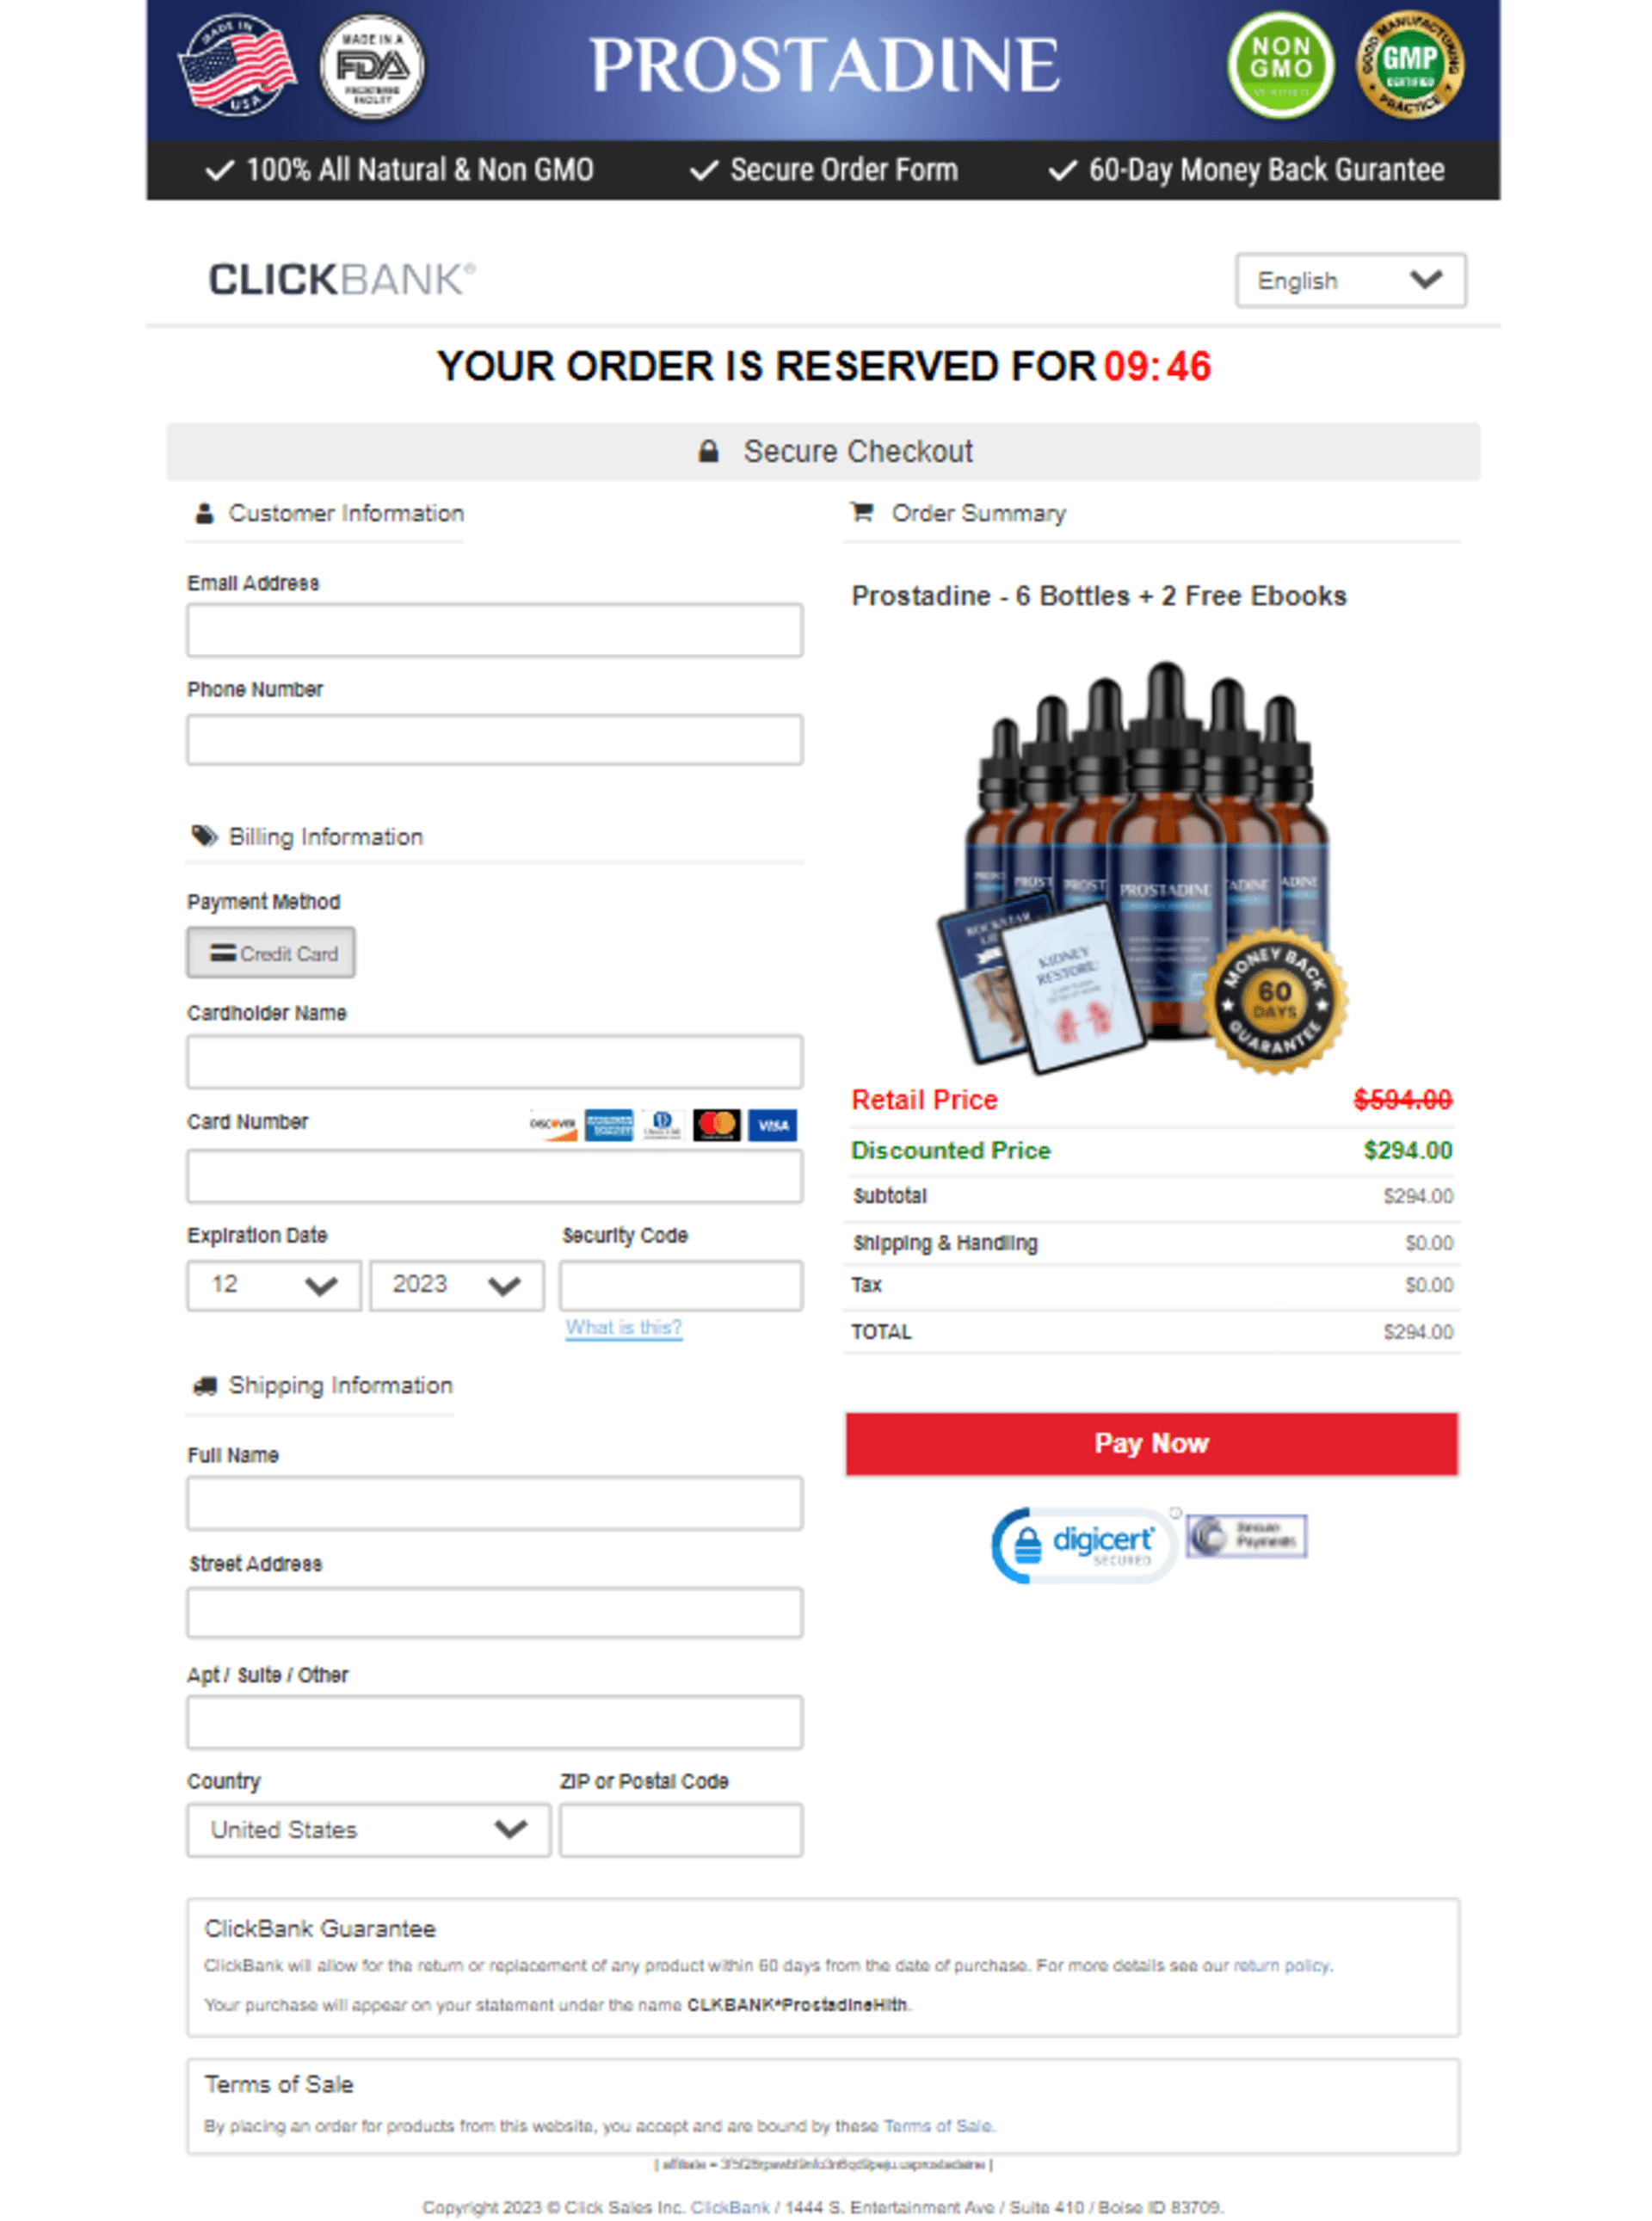 Order Page